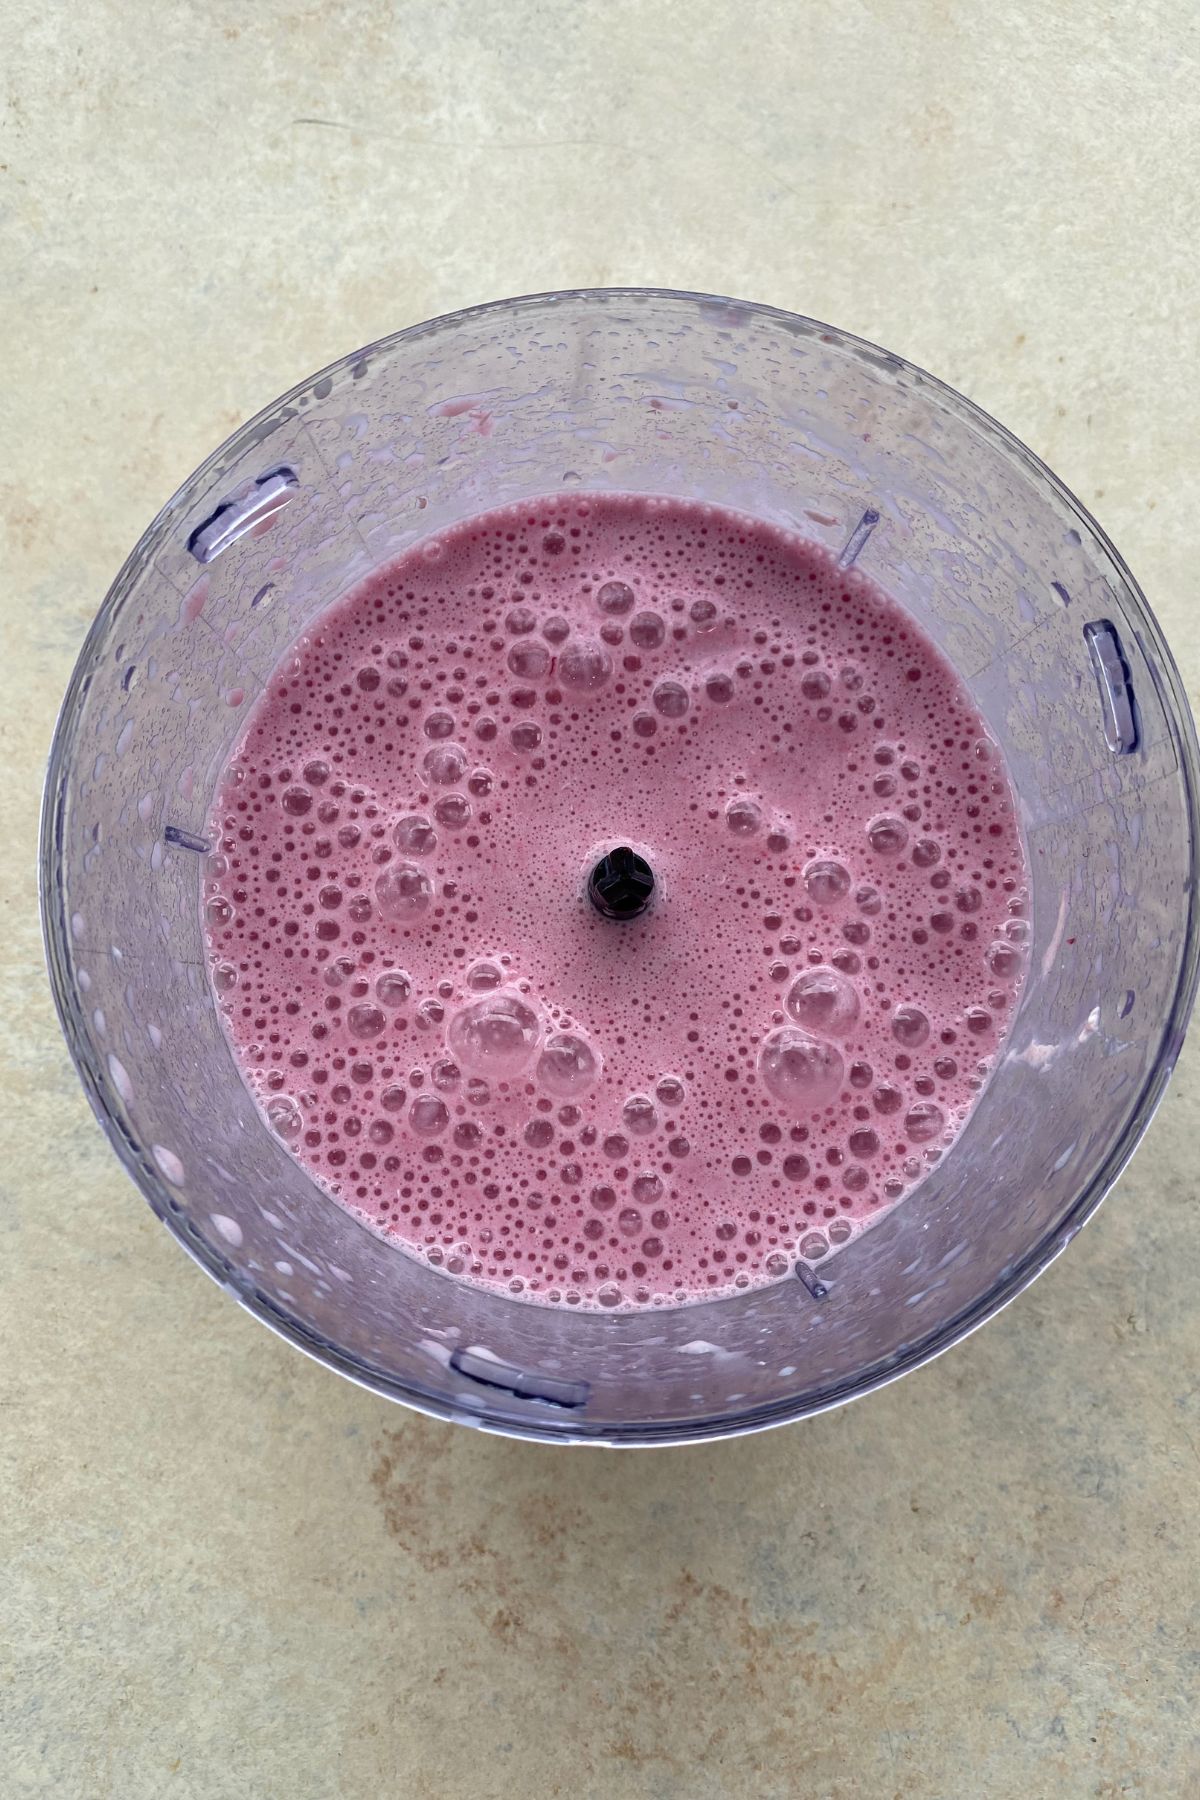 A blueberry smoothie in a bowl on a table.